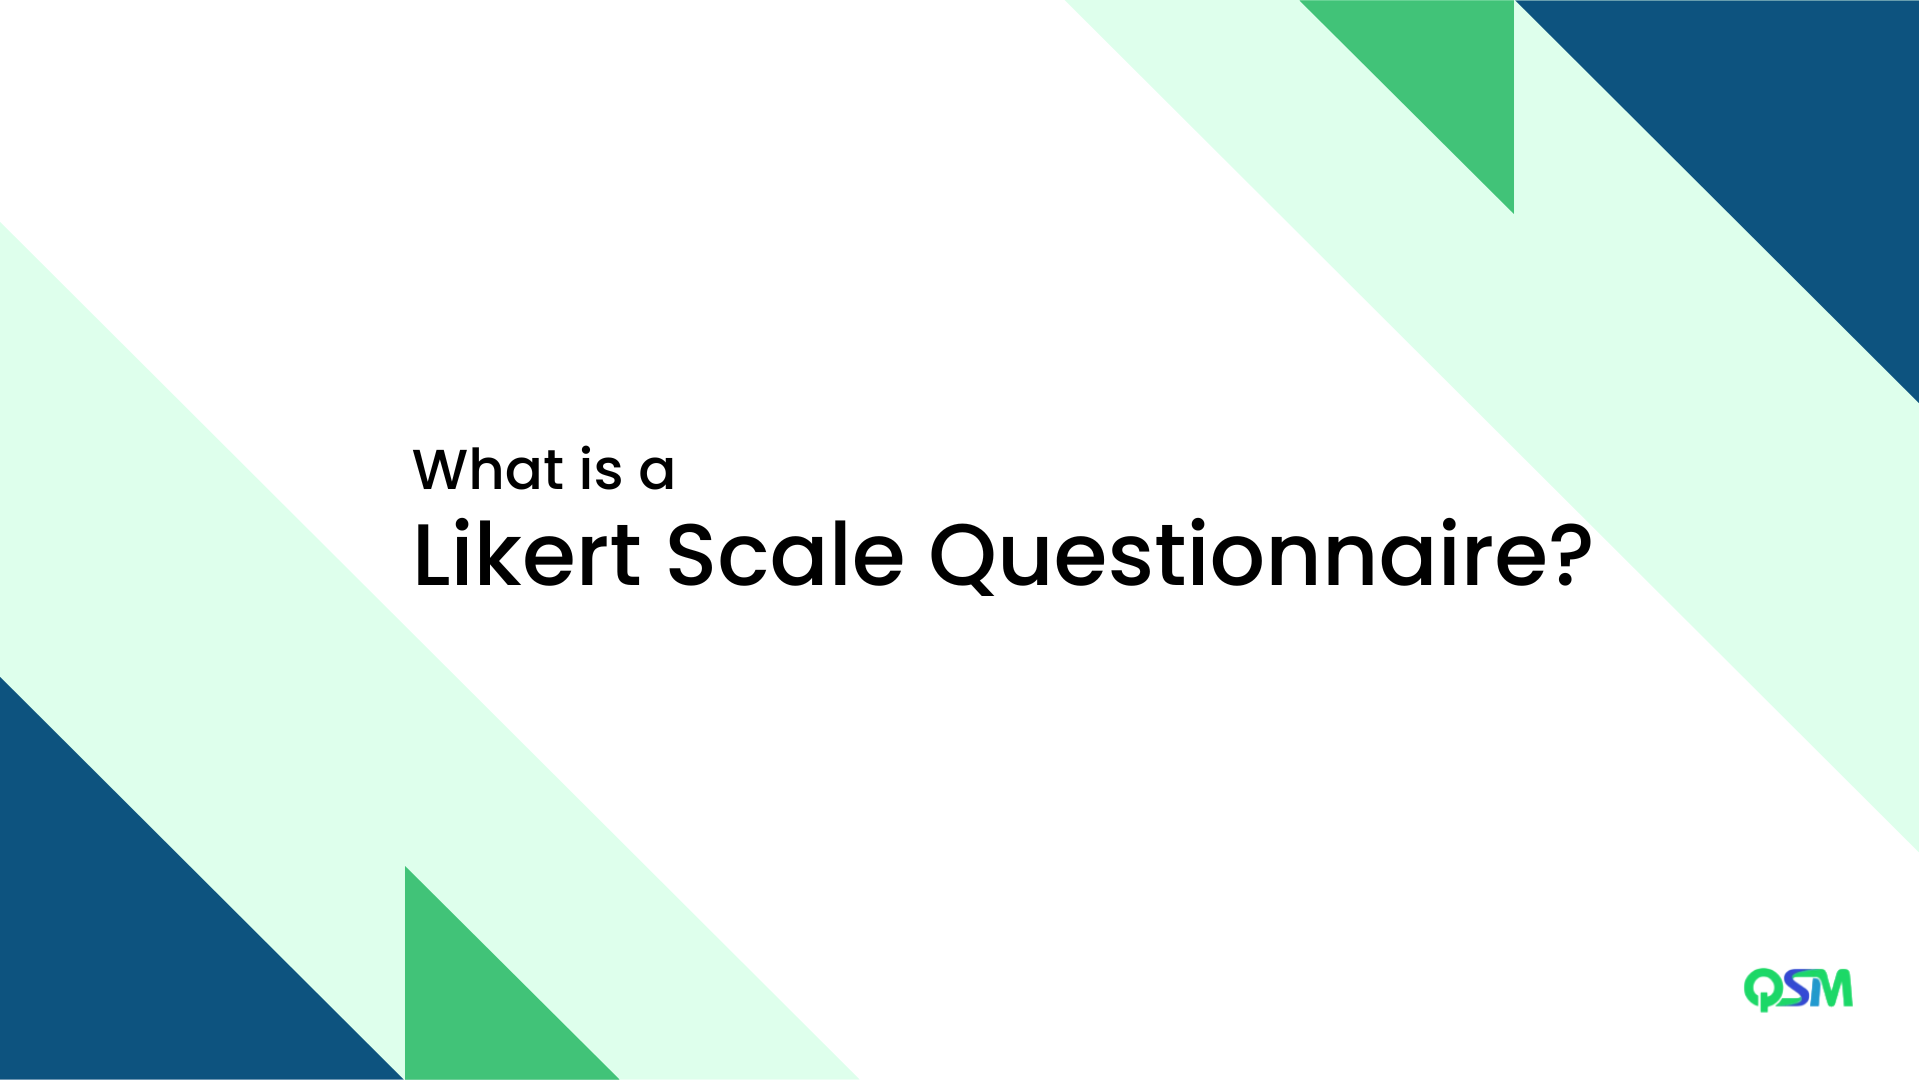 What is the Likert Scale Questionnaire?